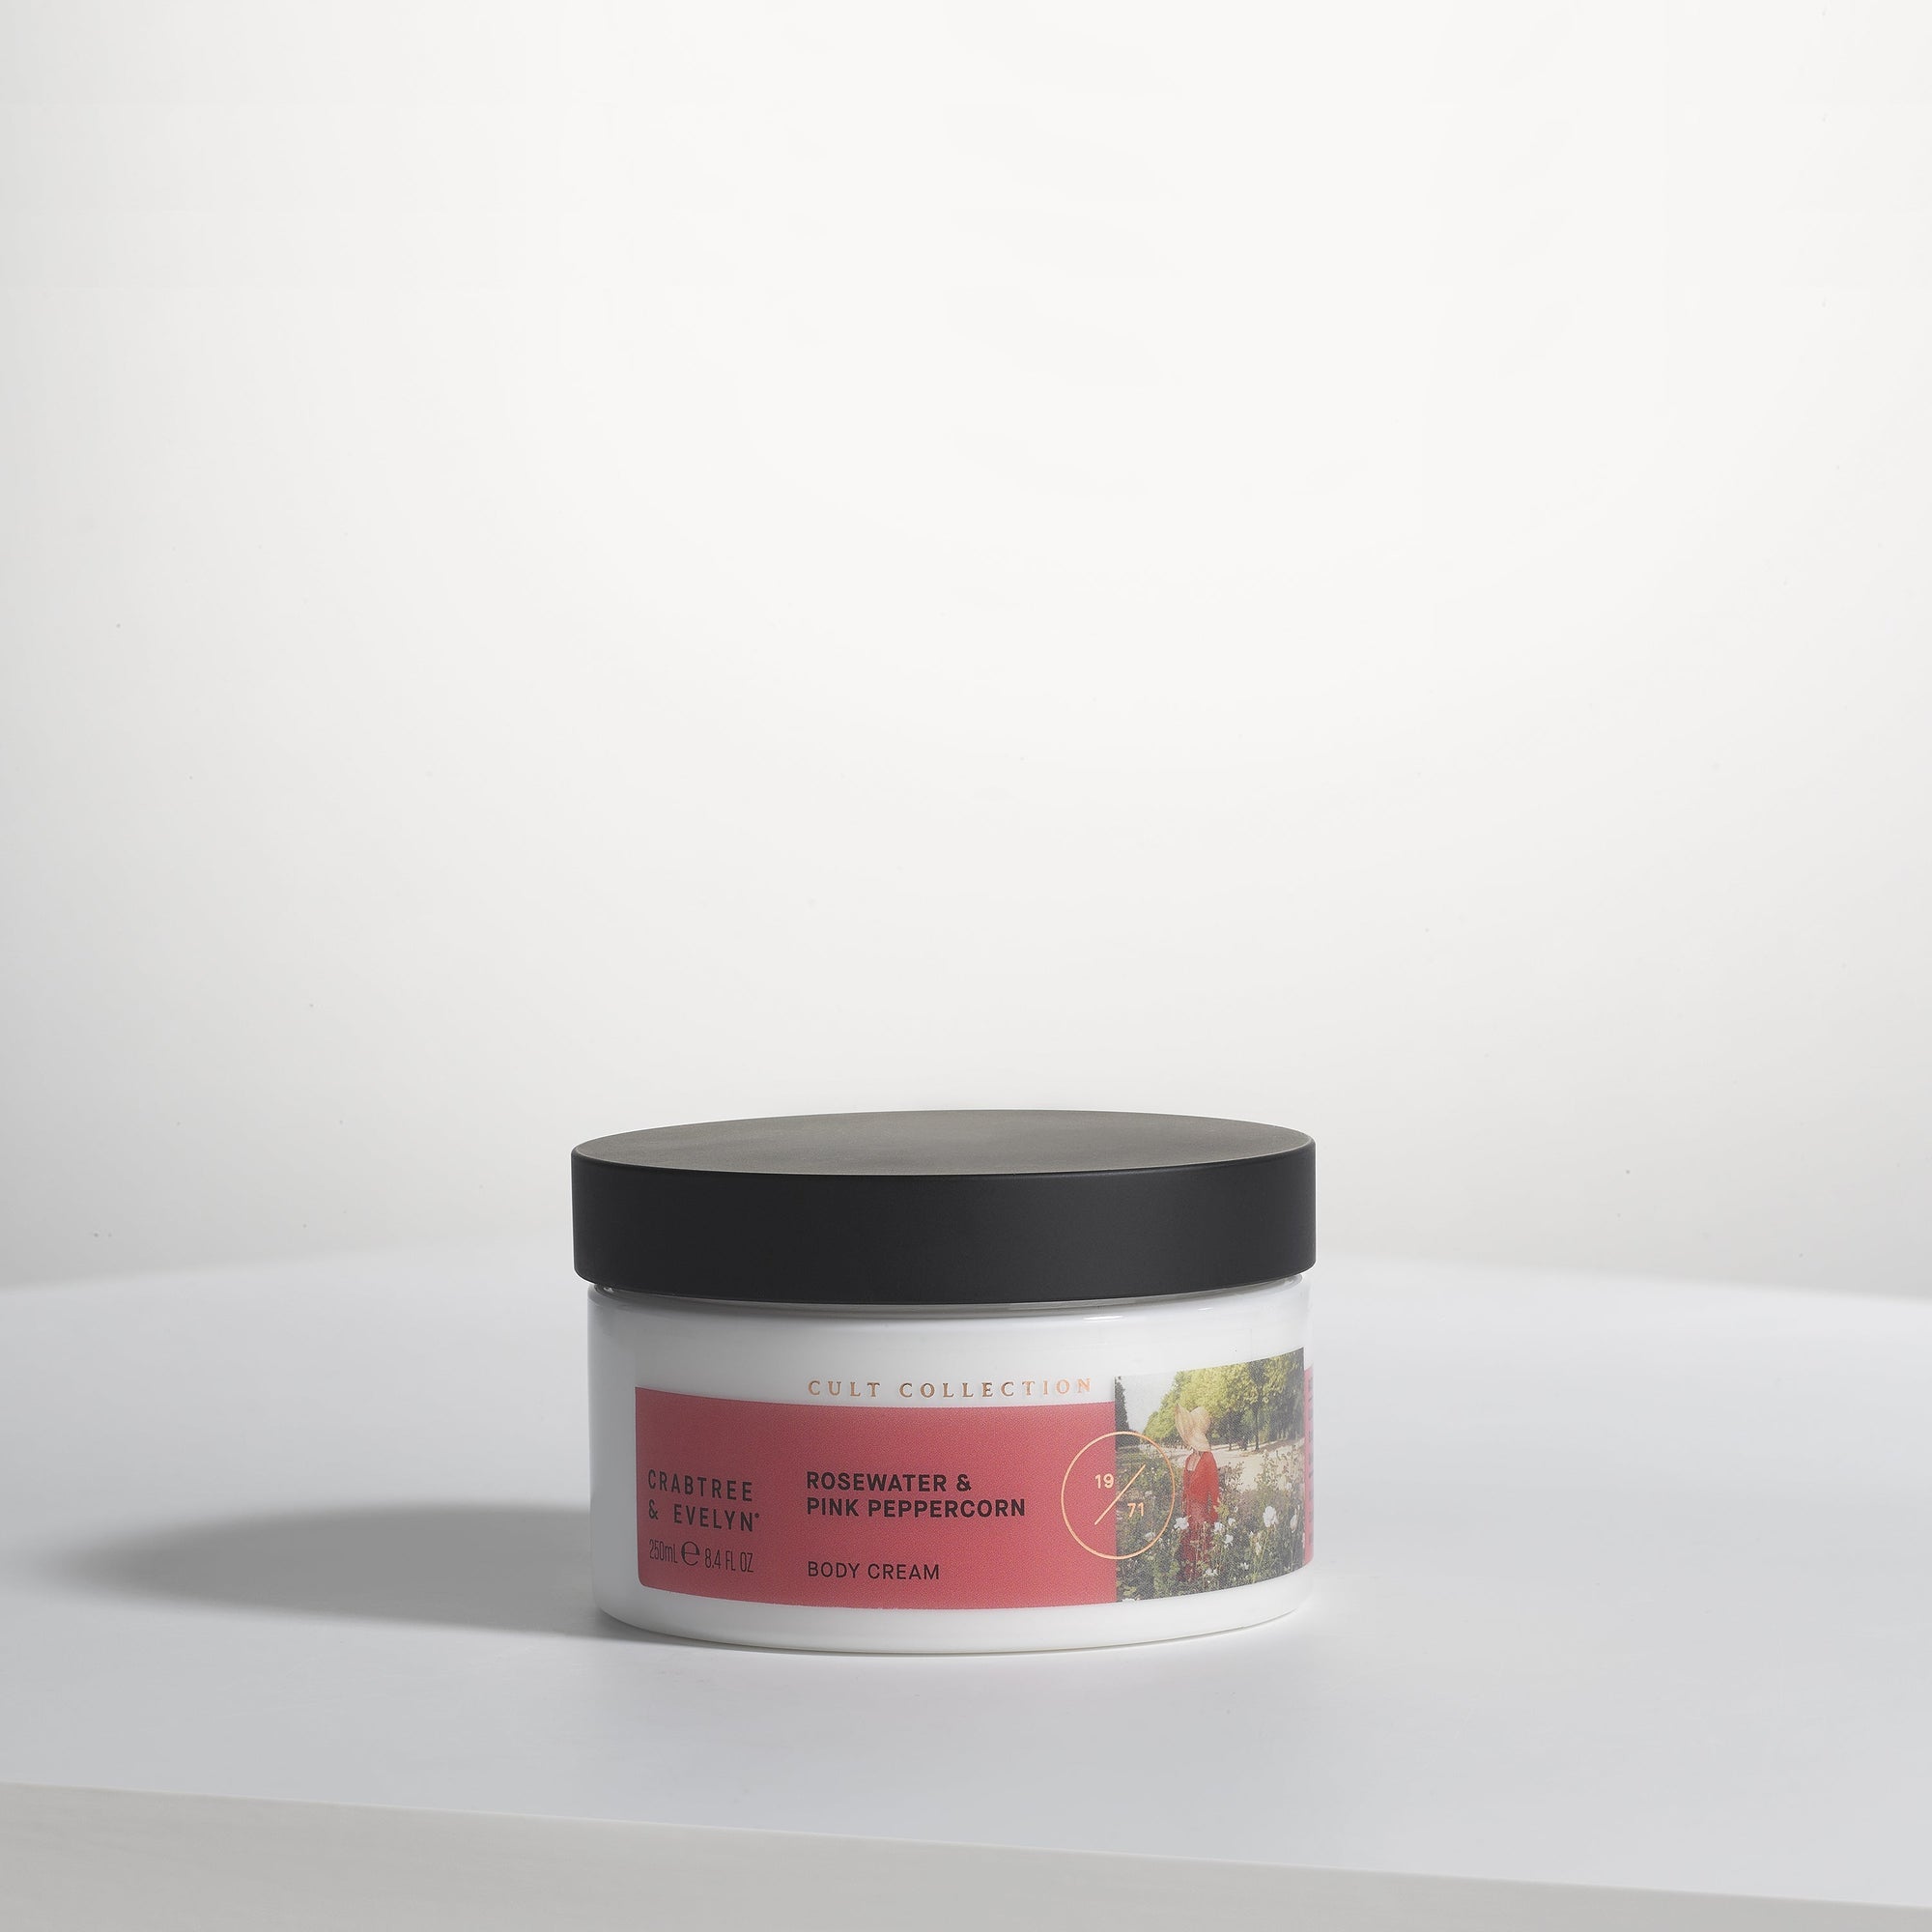 Cult Collection-Rosewater & Pink Peppercorn Body Cream - 250ml